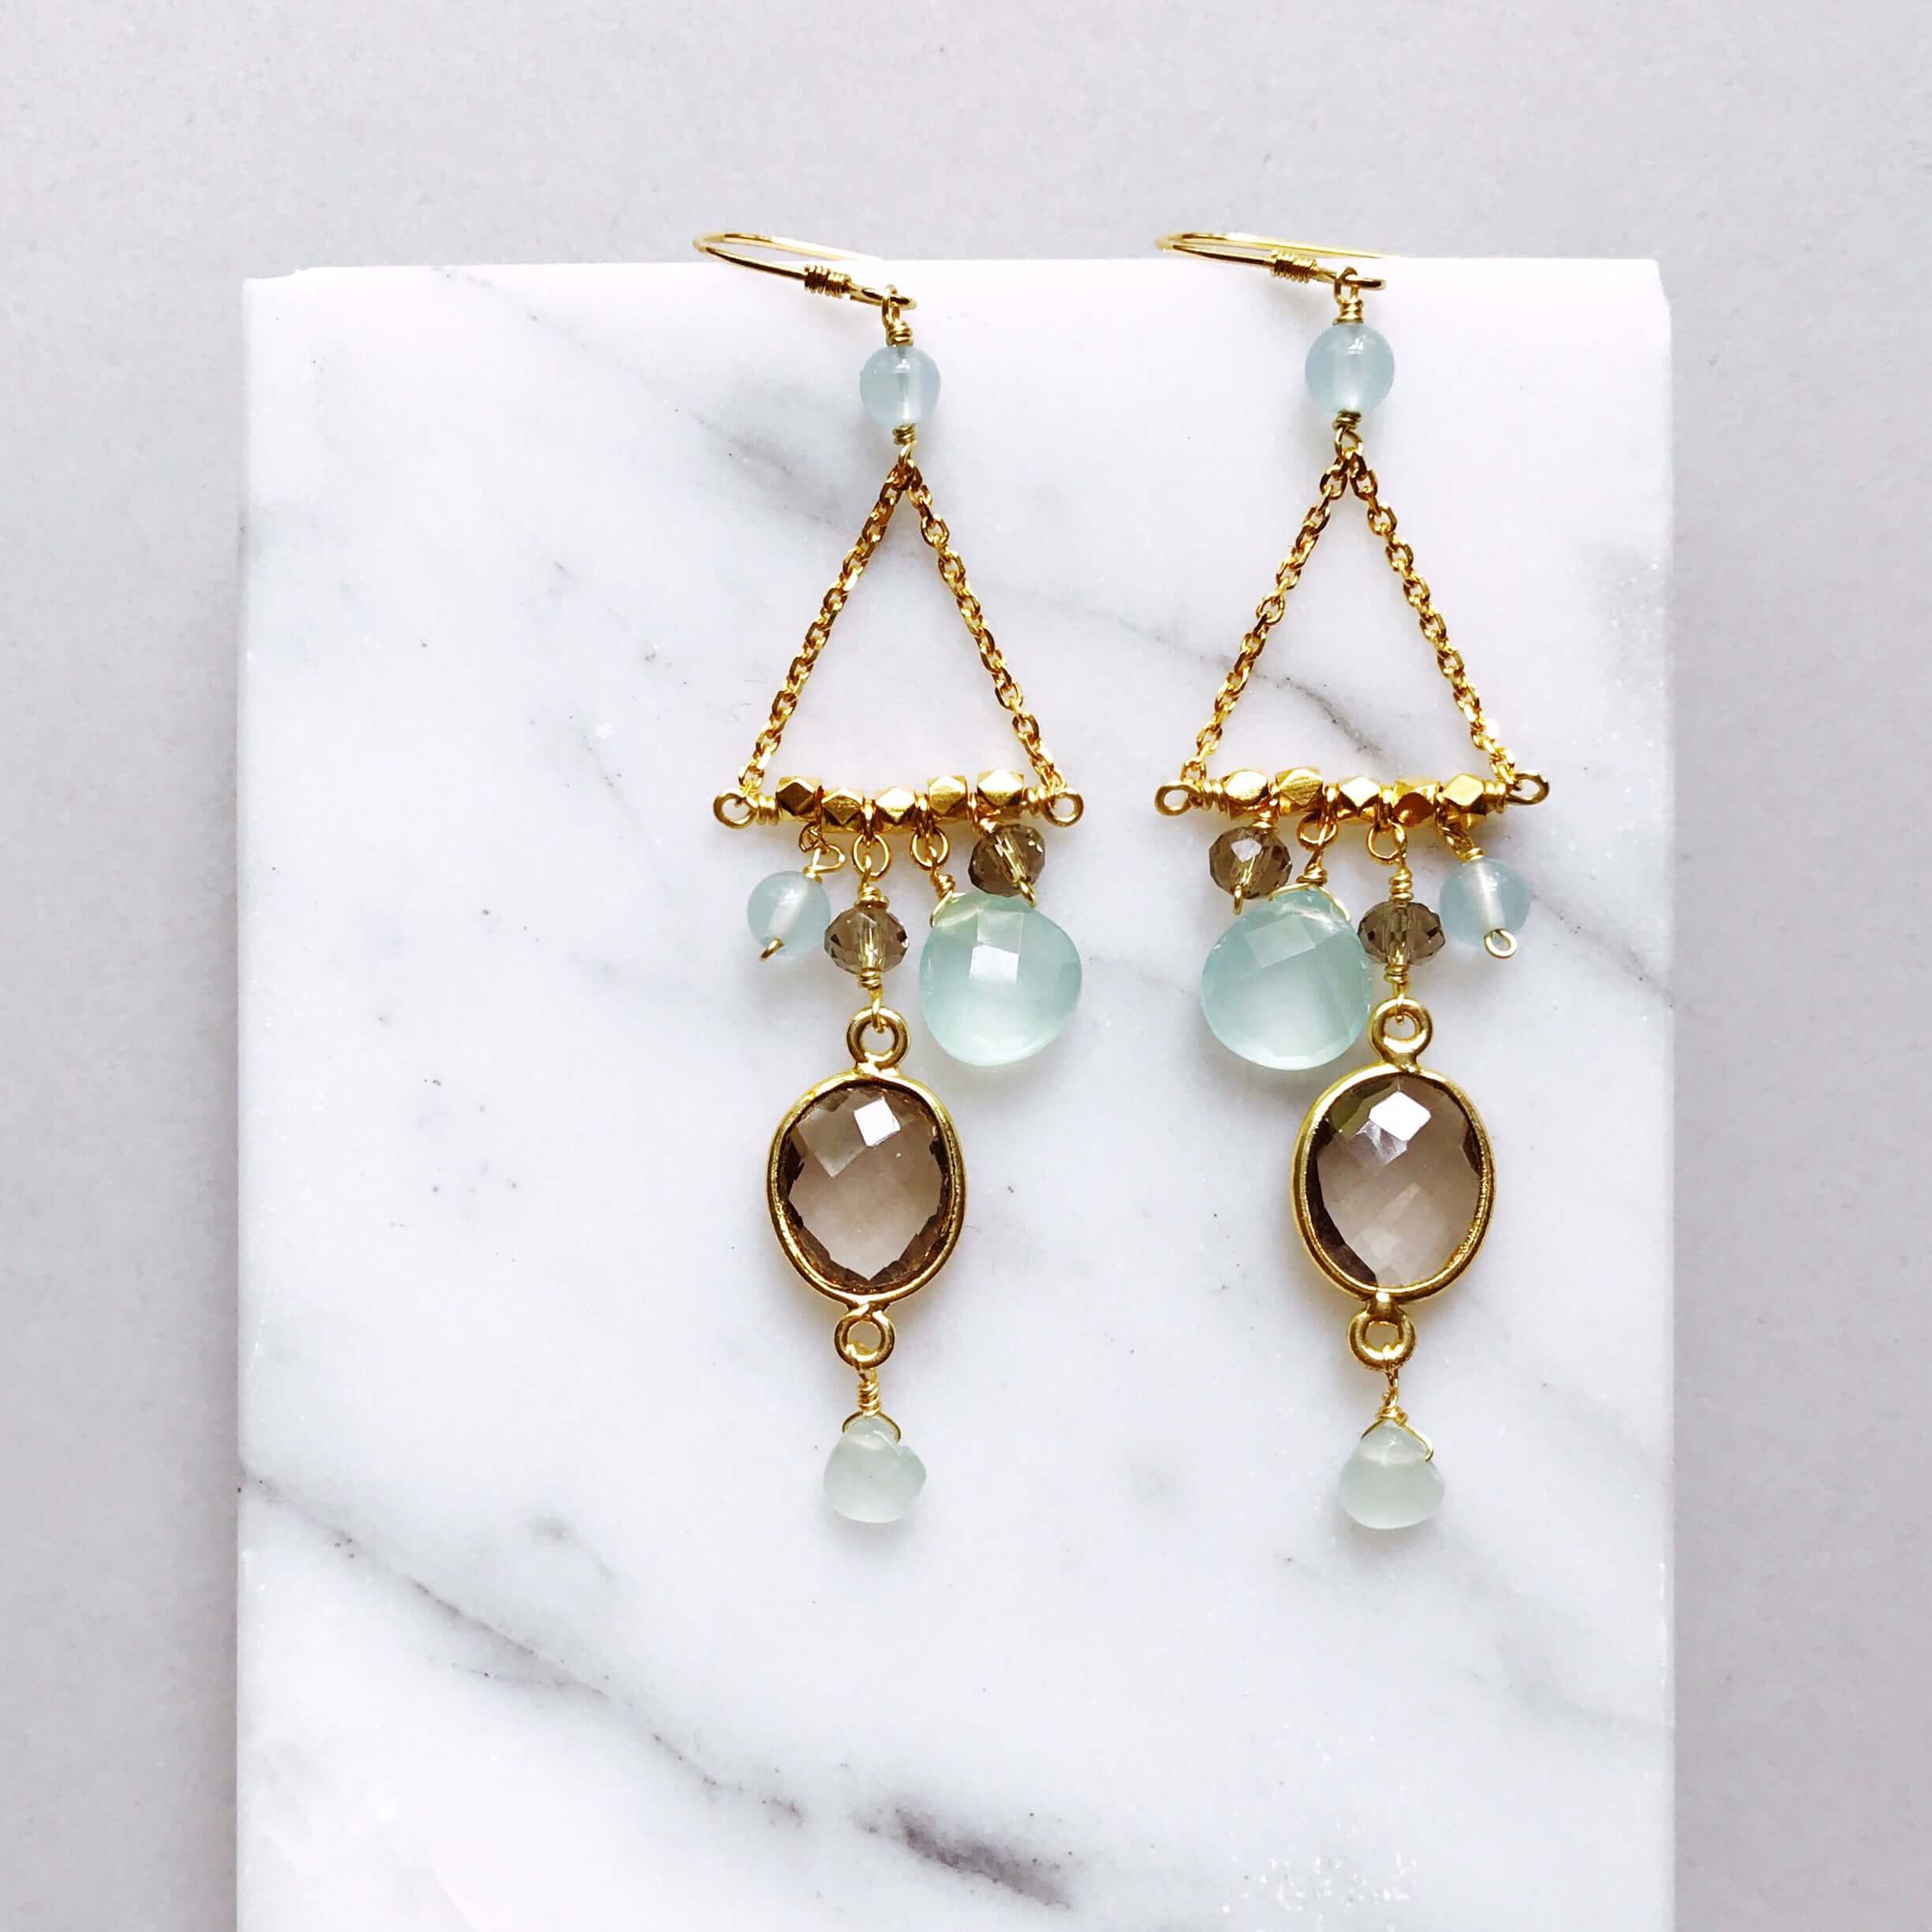 French Hooks, bezel set smoky quartz gemstones surrounded by a variety of faceted aqua chalcedony accent stones Gold pair of Earrings